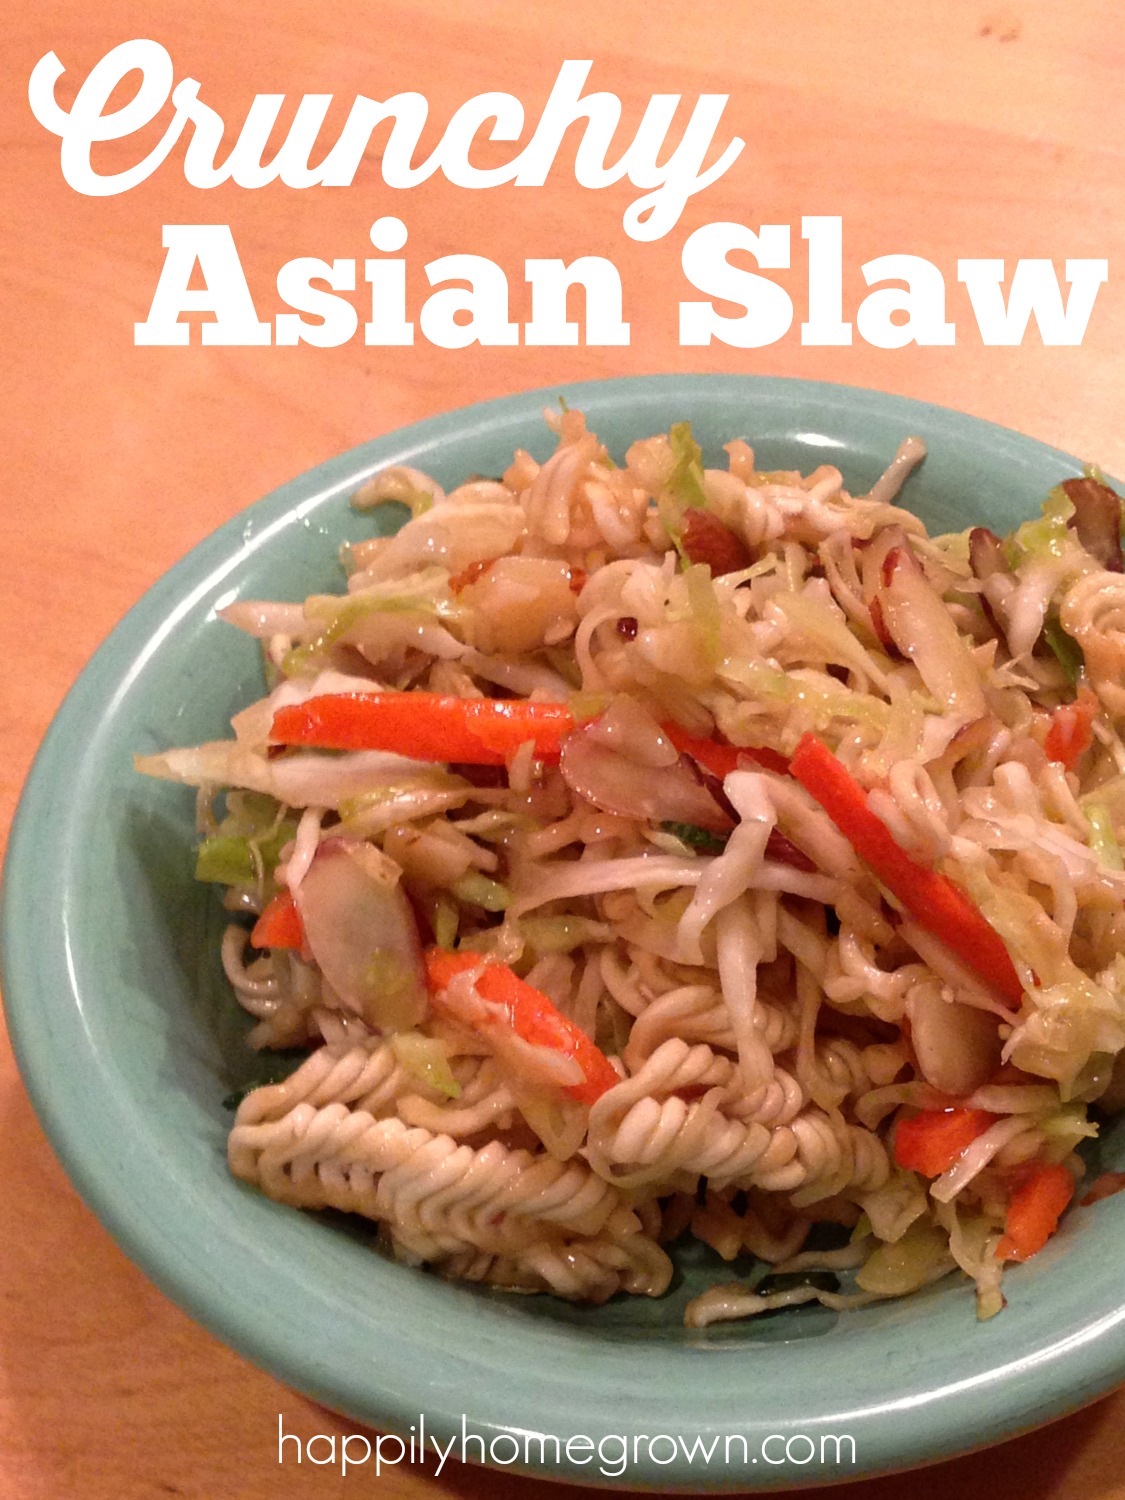 This Crunchy Asian Slaw is a delicious and super easy, mayo-free salad to throw together for any meal, BBQ, or picnic.